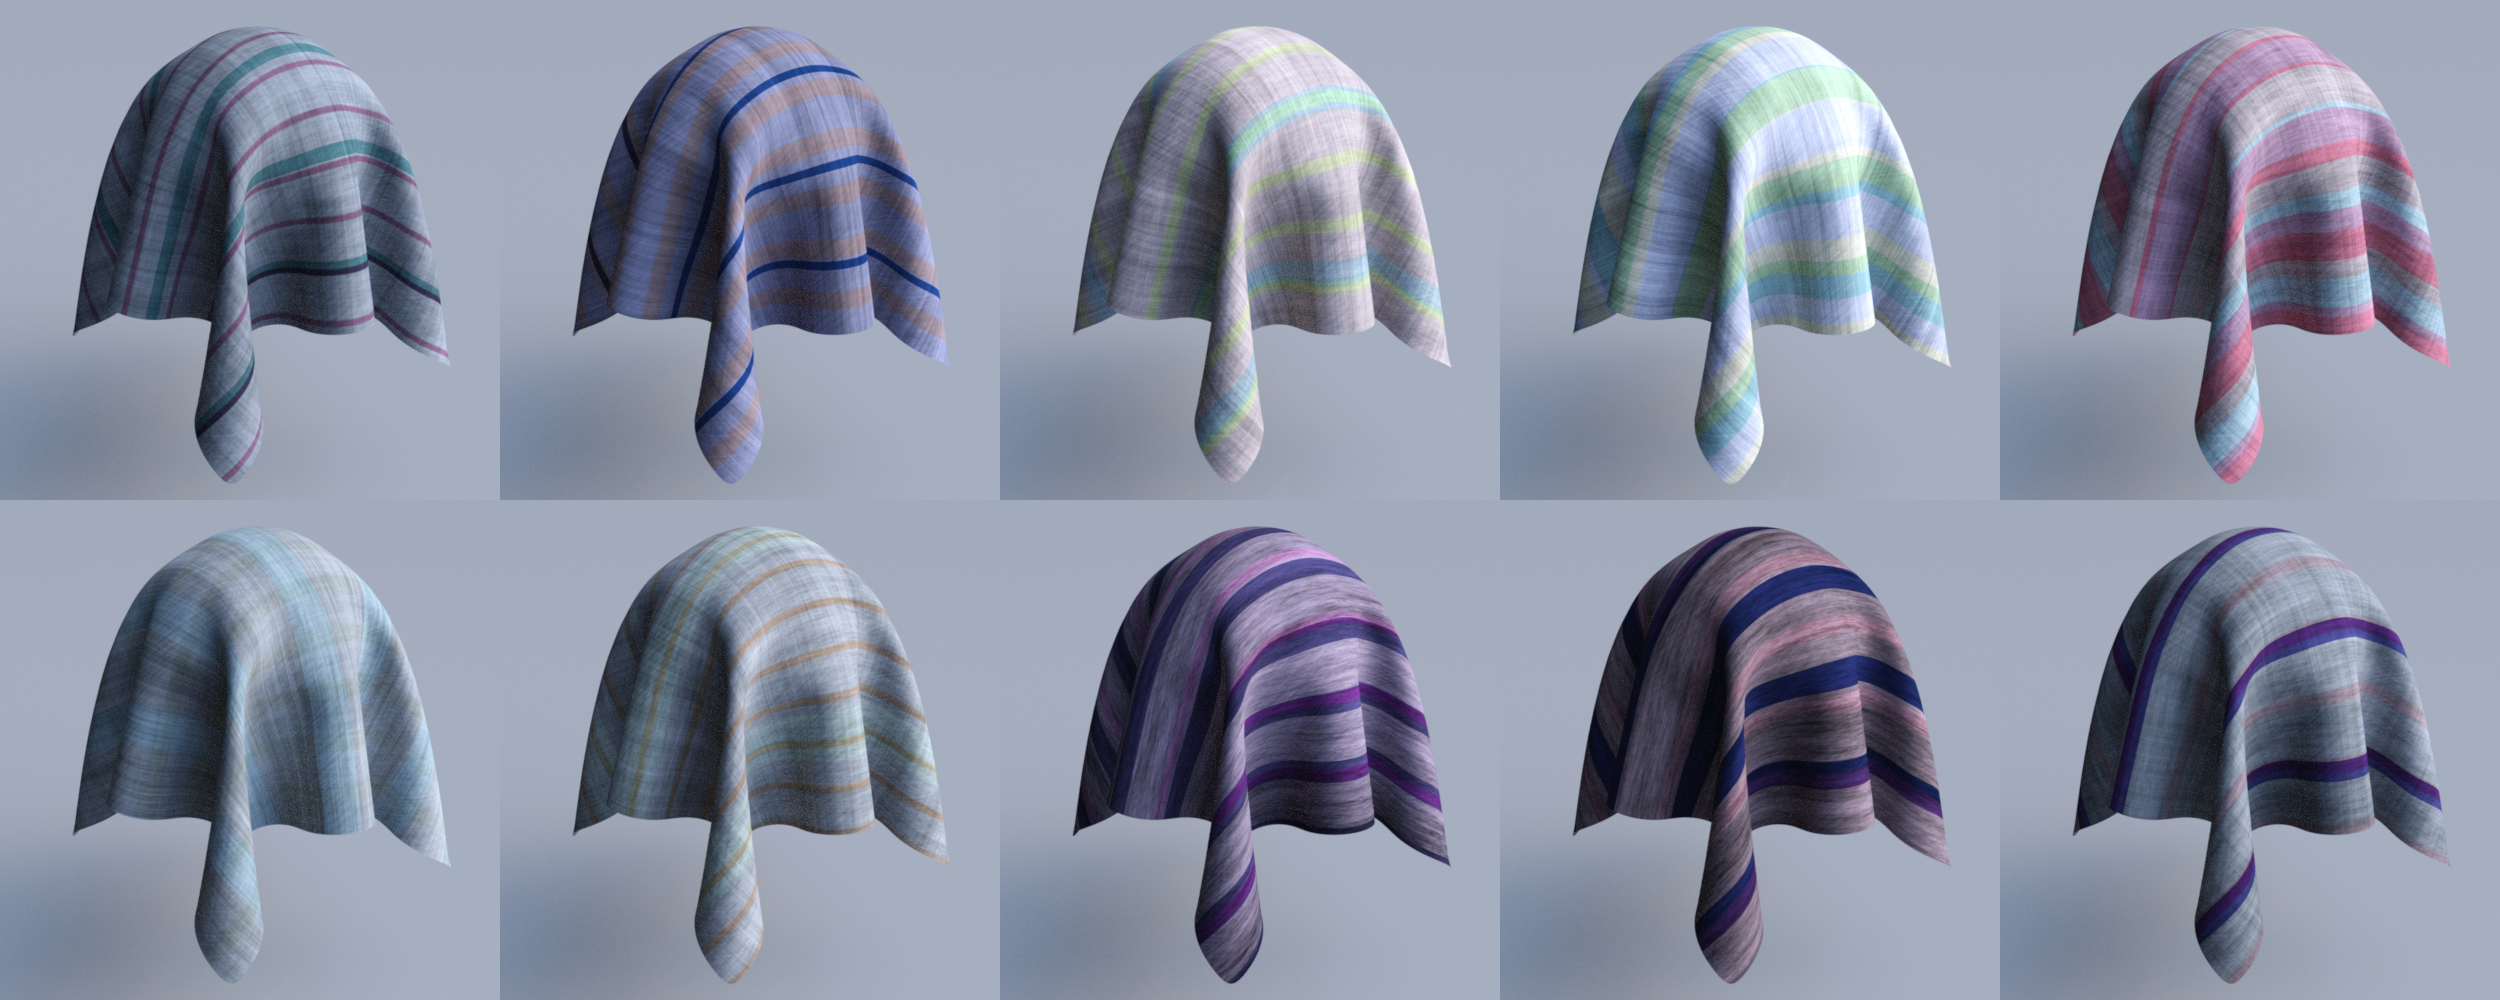 Gingham and Stripes Iray Shaders by: JGreenlees, 3D Models by Daz 3D